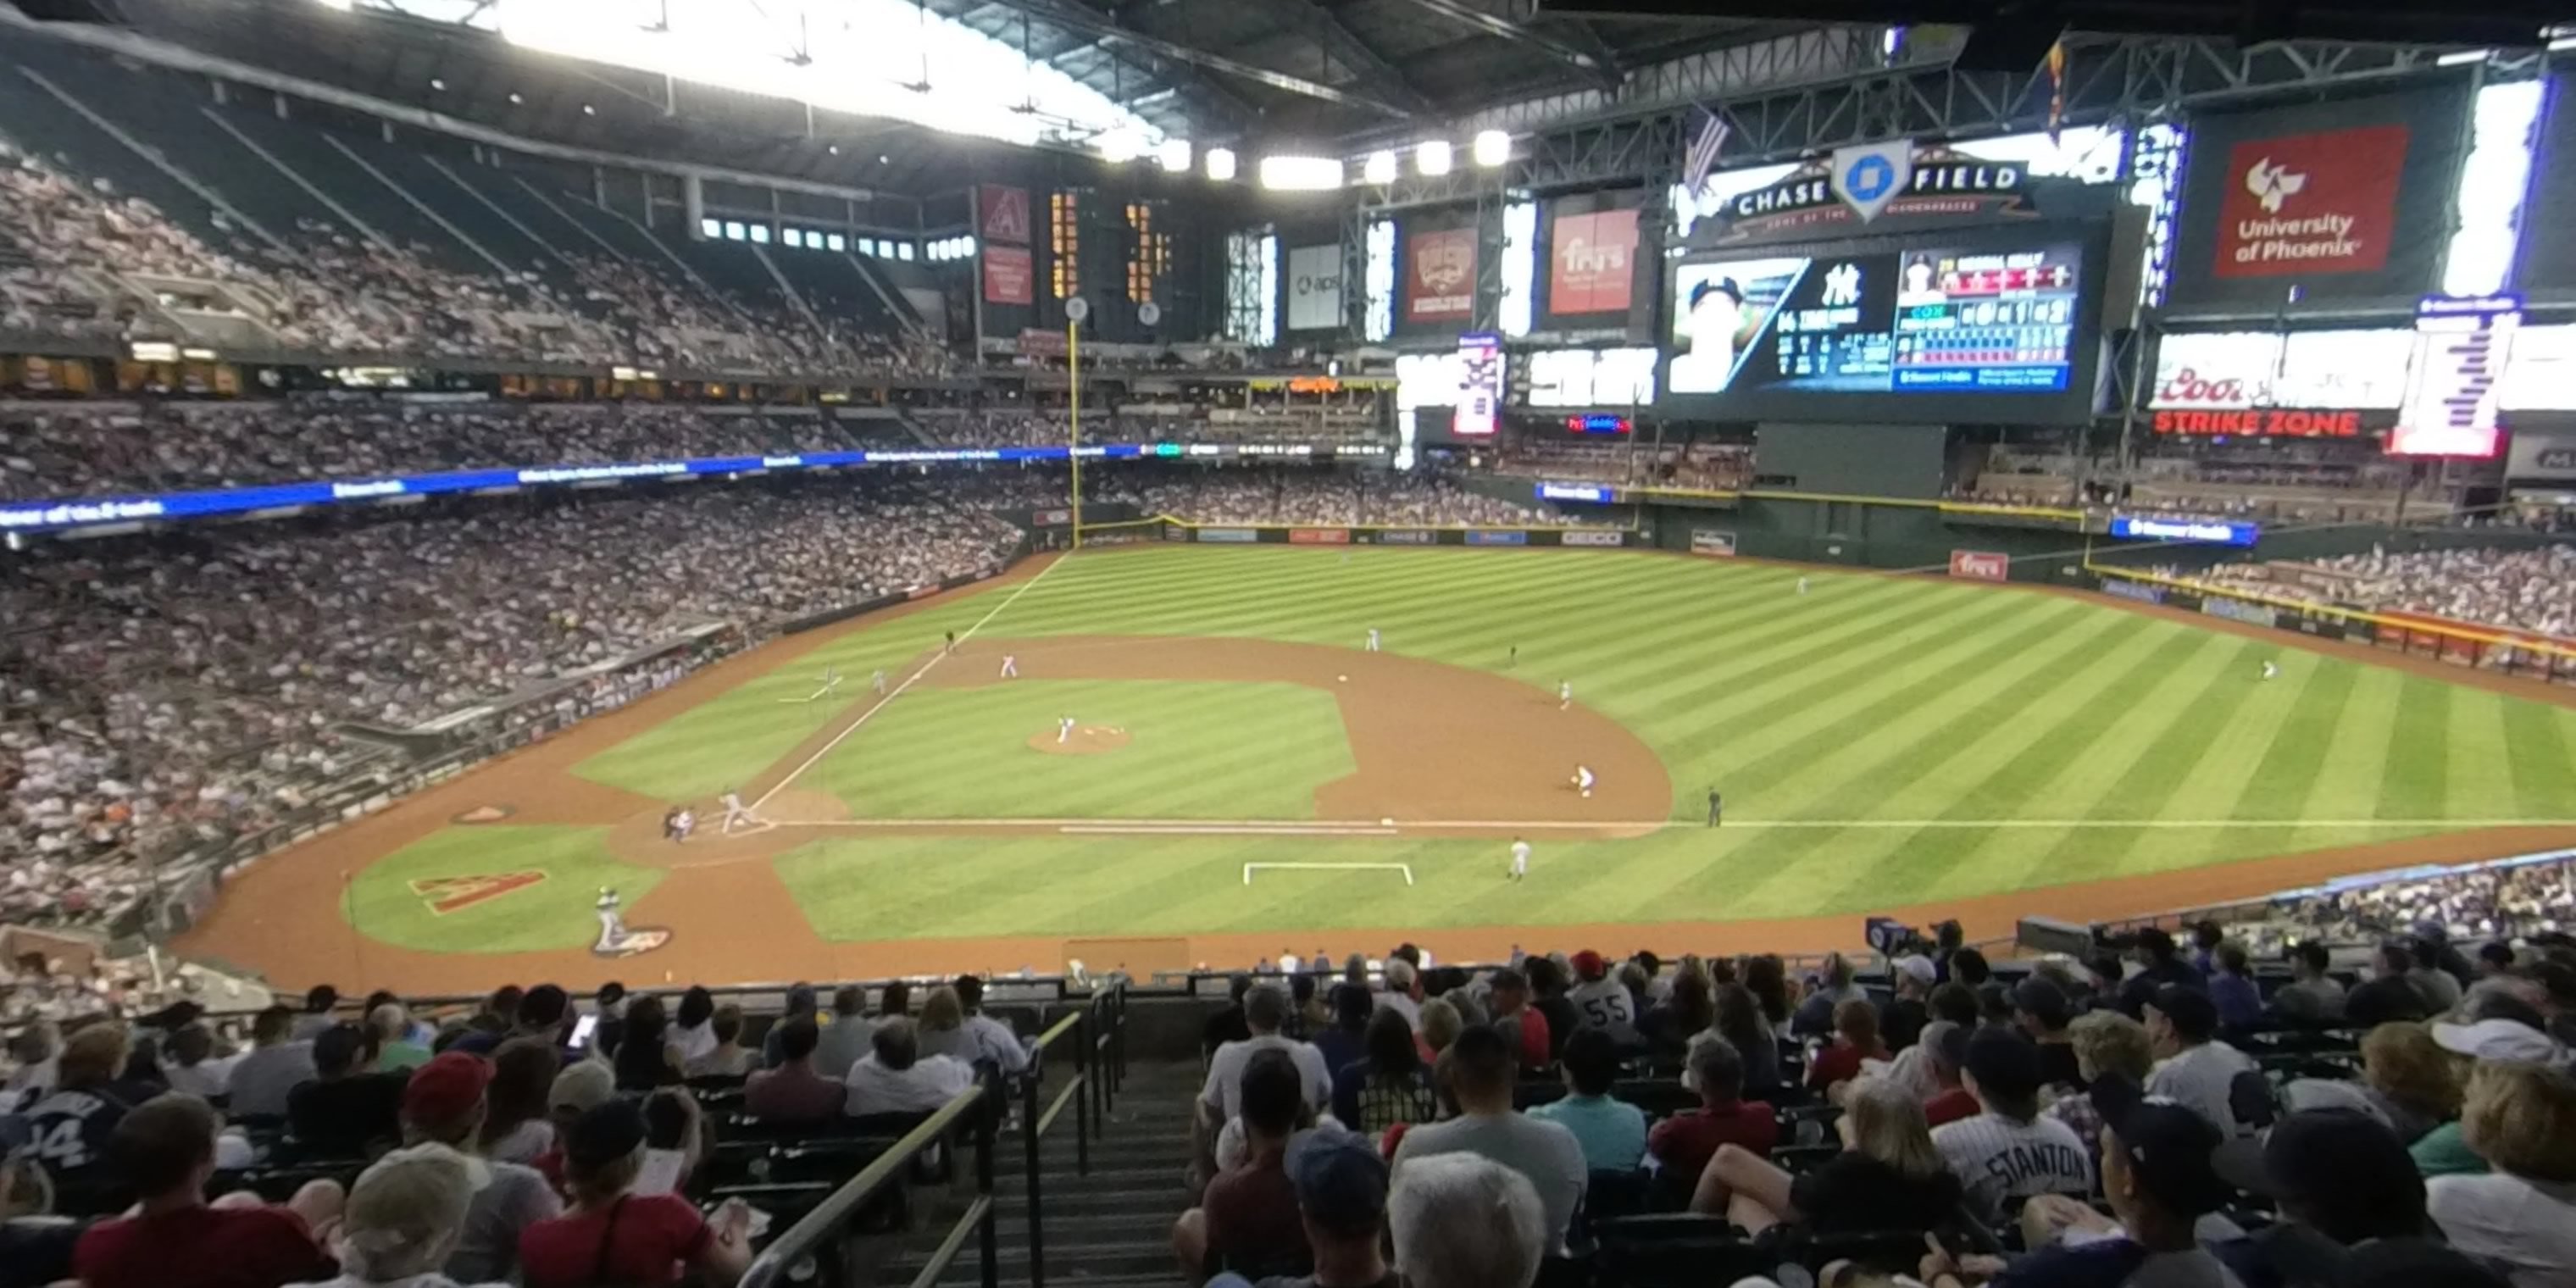 section 209 panoramic seat view  for baseball - chase field